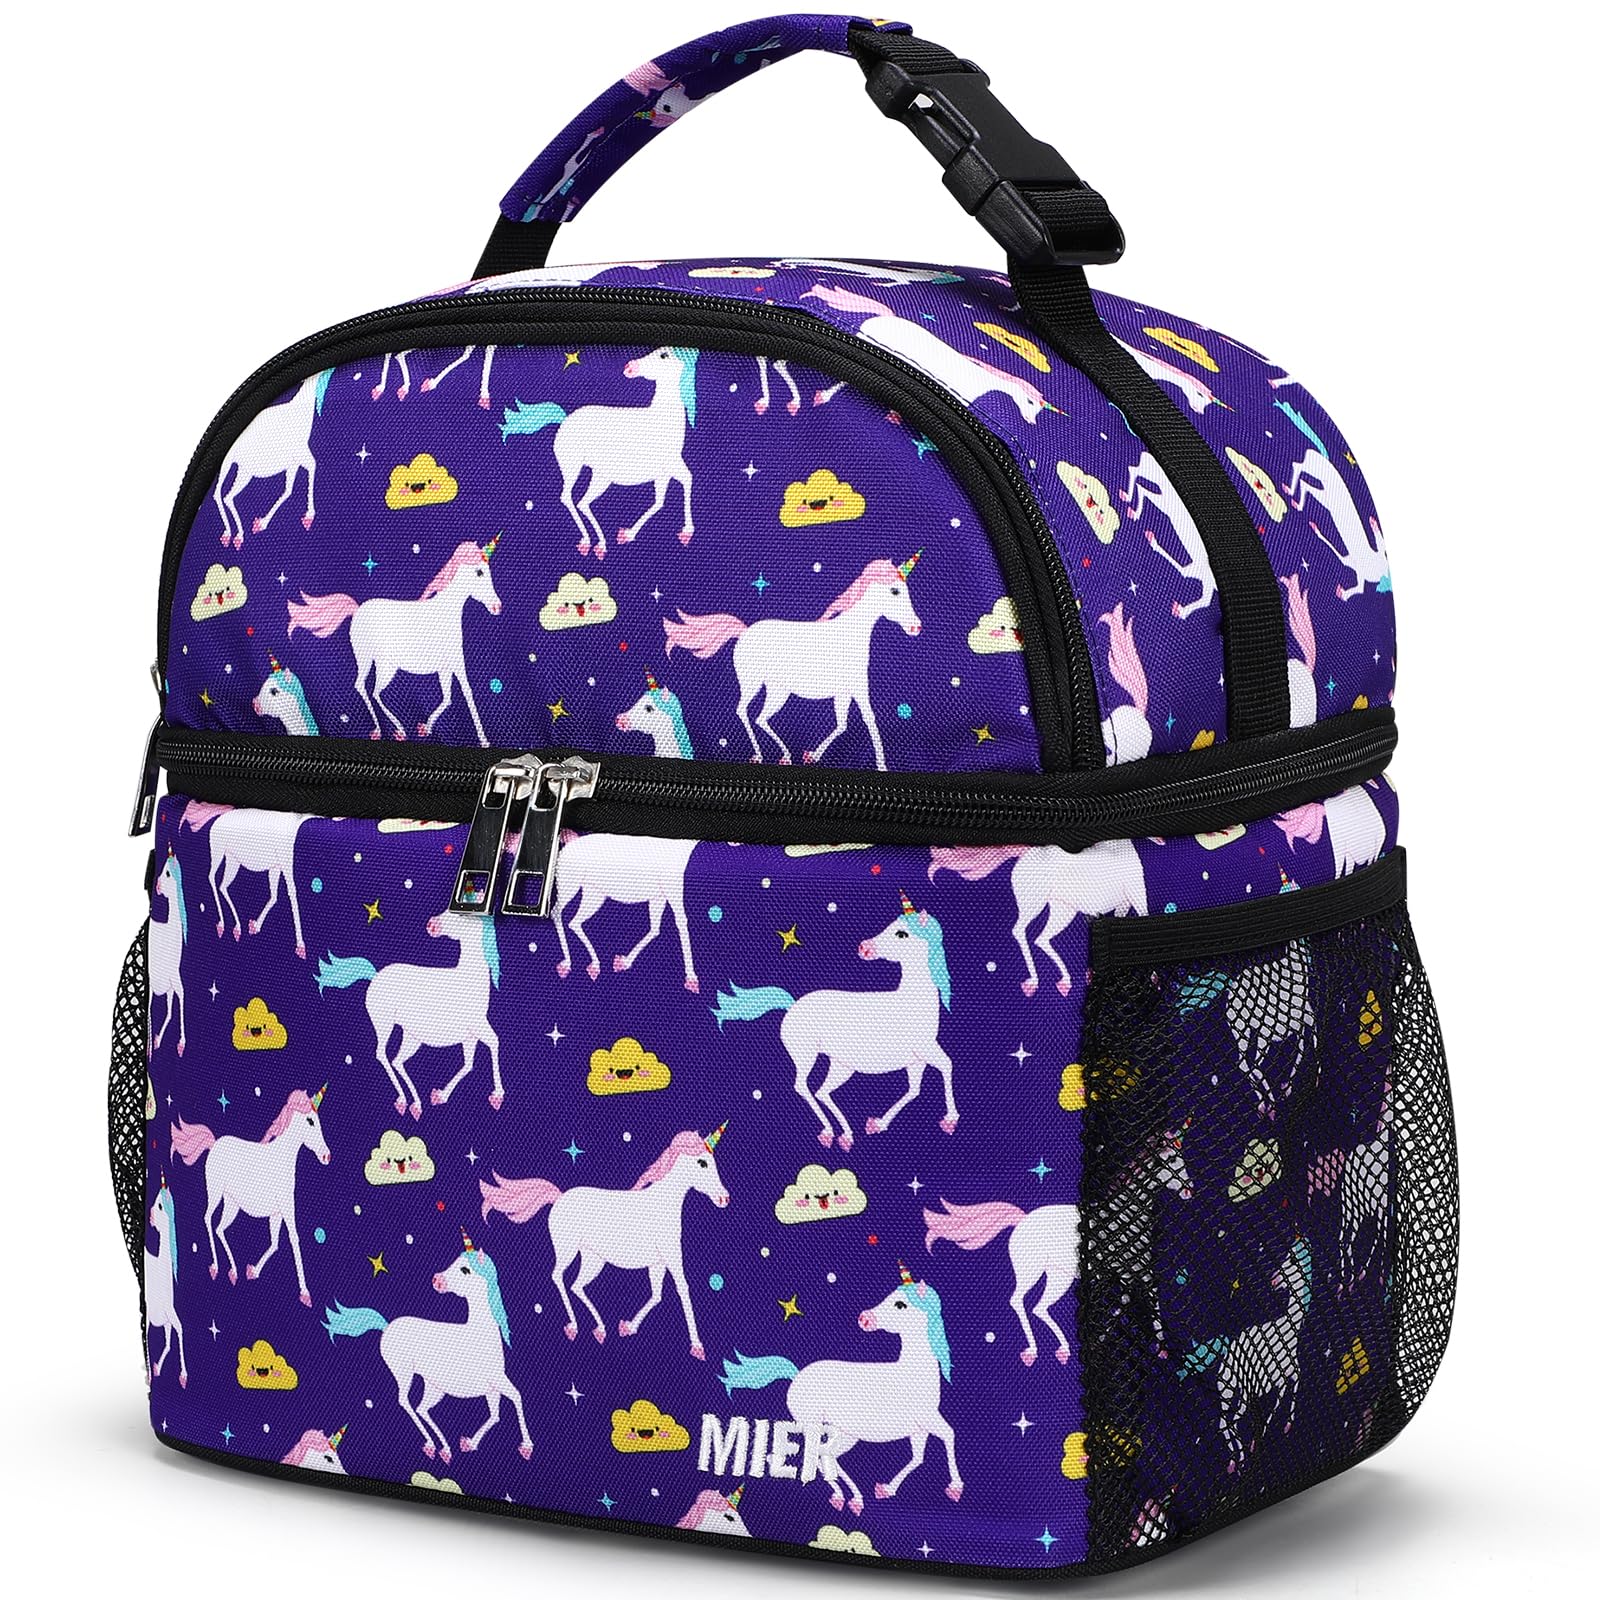 https://www.miersports.com/cdn/shop/files/kids-lunch-bag-insulated-toddlers-lunch-cooler-tote-purple-unicorn-mier-32079952543878.jpg?v=1698830894